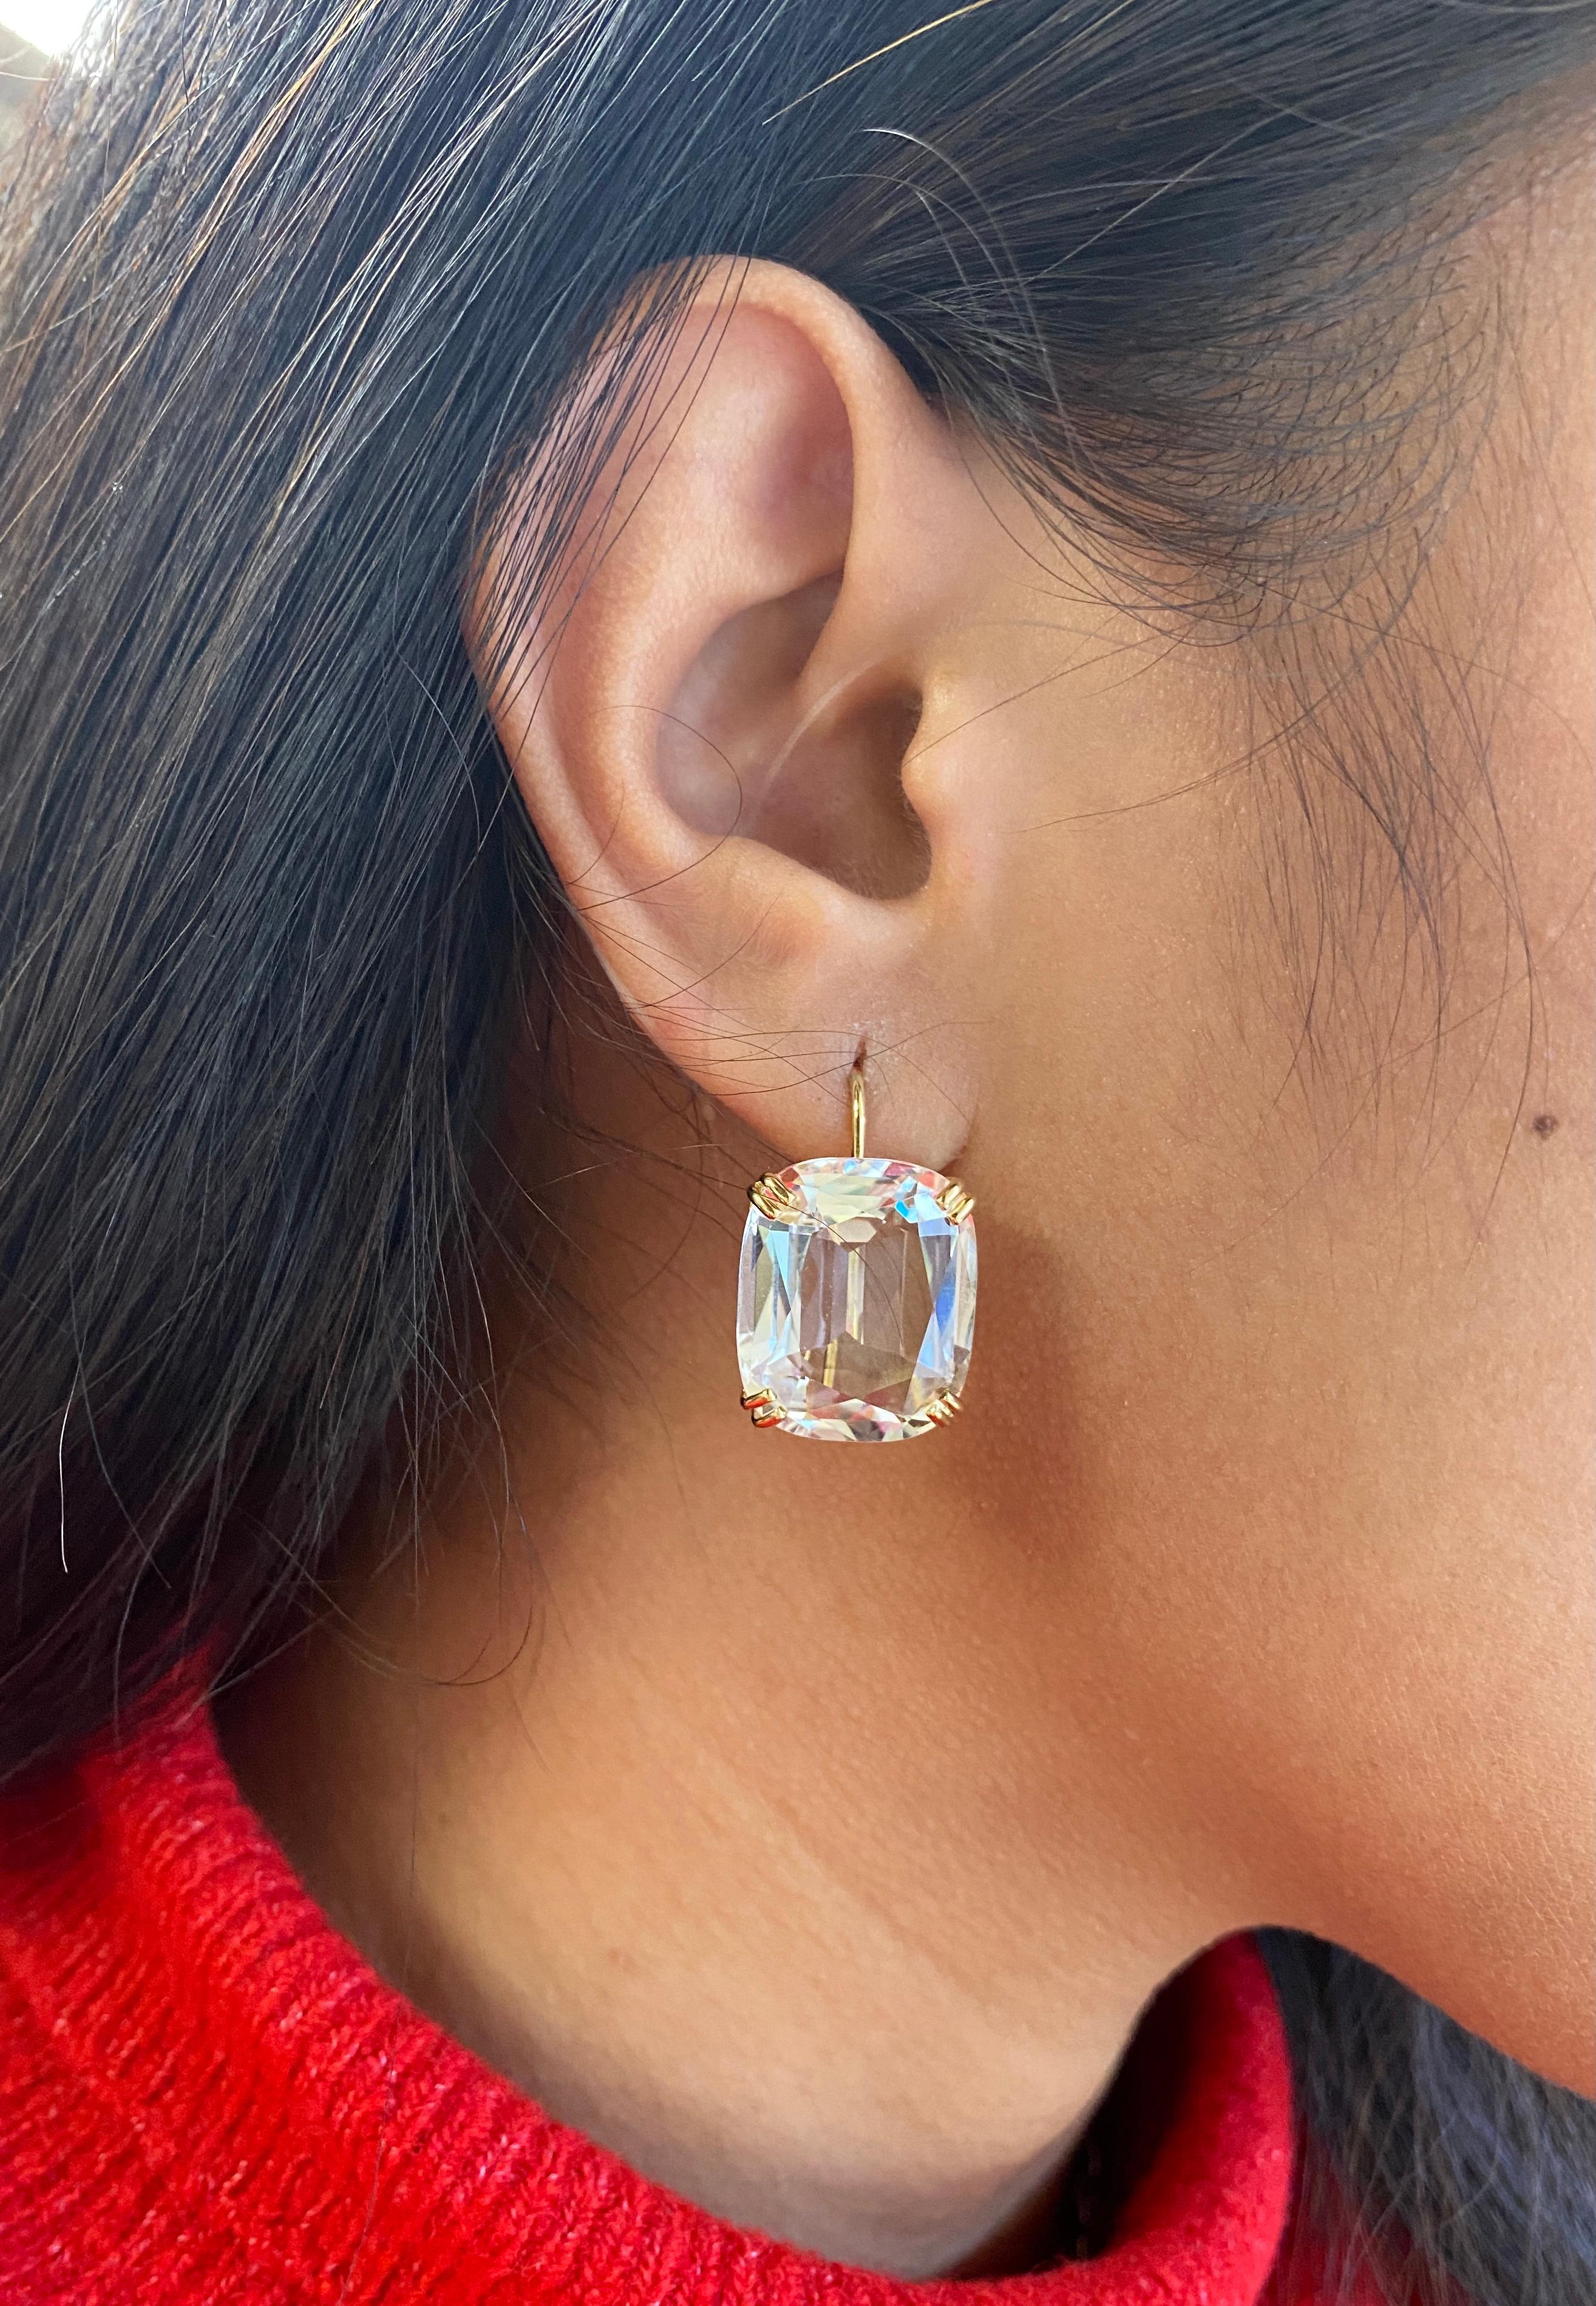 These Rock Crystal Cushion Earrings on Wire, are a dazzling piece of jewelry crafted with utmost artistry and elegance. Part of our very popular 'Gossip' Collection, these earrings embody grace and sophistication.

The focal point of these earrings